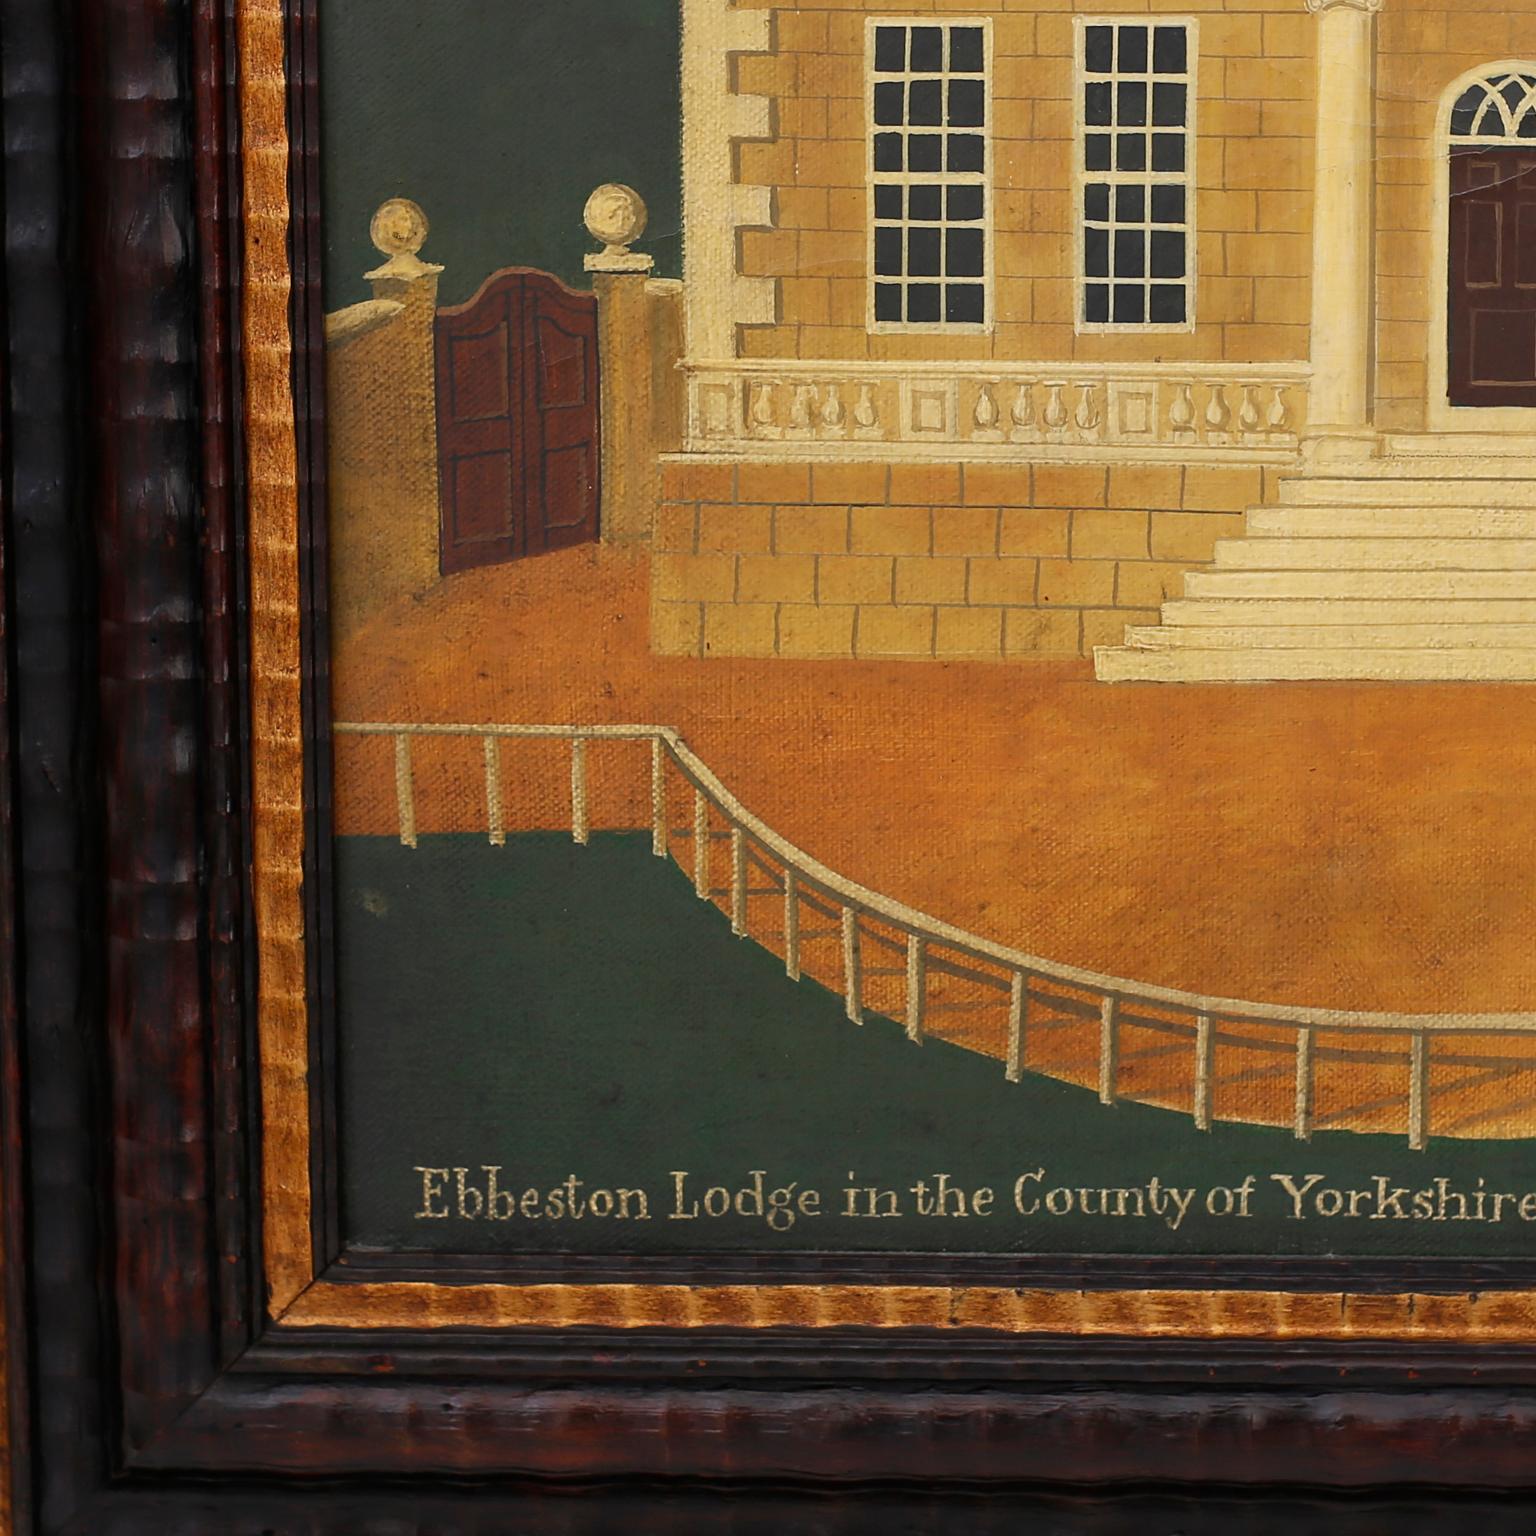 Architectural oil painting on canvas of the Ebbeston Lodge in the county of Yorkshire by Dan Dunton, executed in a rustic naive style and presented in a carved wood frame.